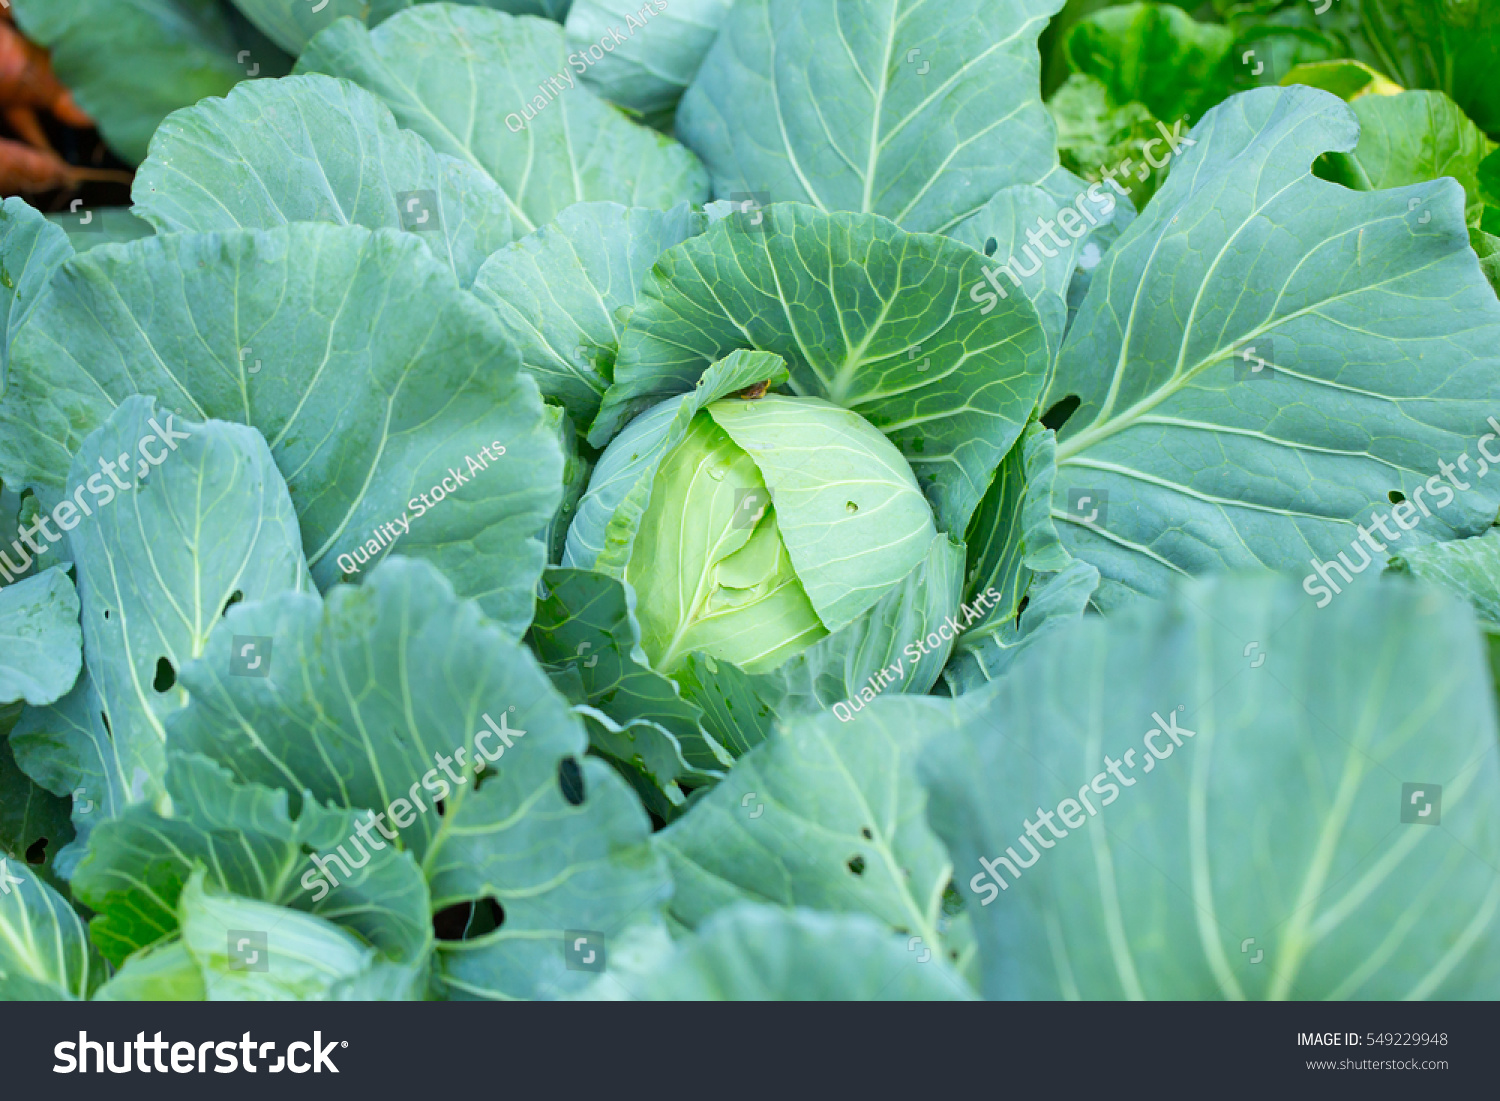 Cabbage plant at agriculture farm in north of Thailand #549229948